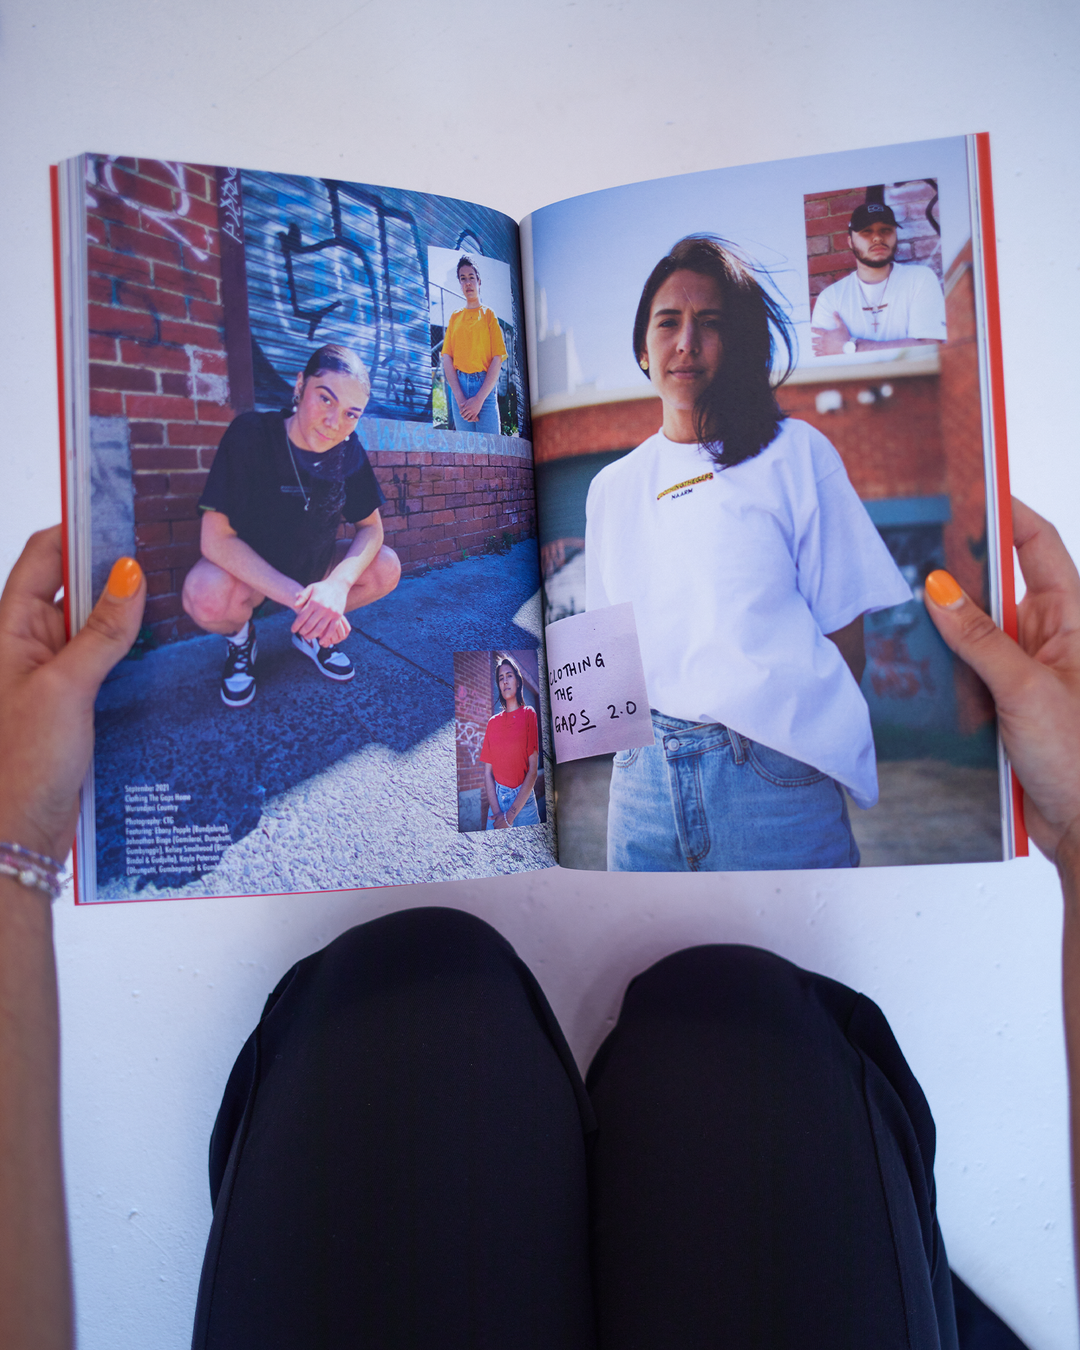 Clothing The Gaps. Self-Published Book DIGITAL DOWNLOAD. This book is a legacy piece – it allows us to reflect on our feelings, struggles, opinions and visions for the future. Containing many old pictures from photo shoots and shares the Clothing the gaps history. 